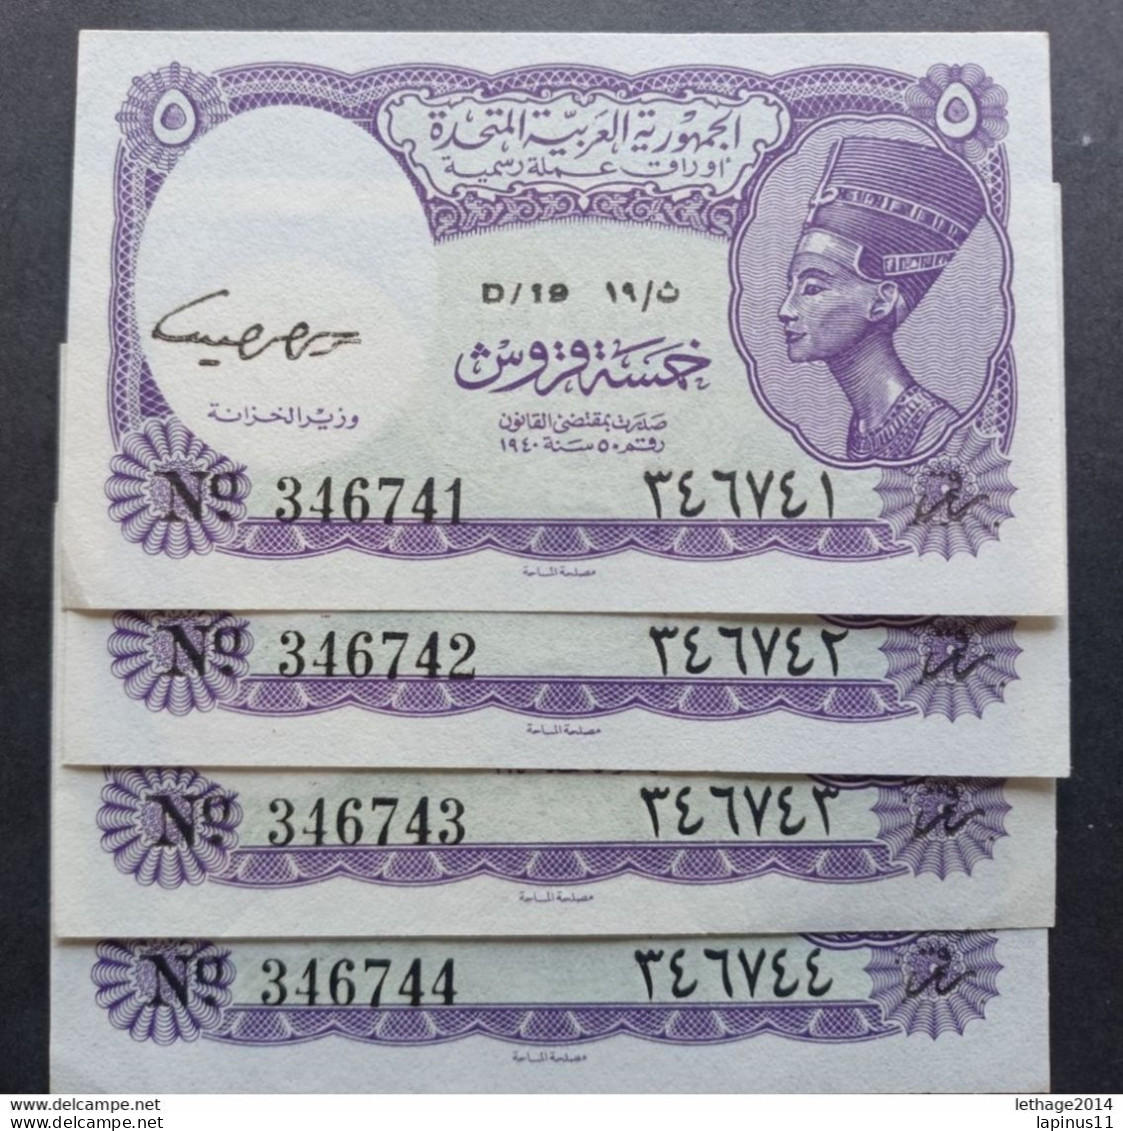 BANKNOTE EGITTO 5 P 1940 UNCIRCULATED SEQUENTIAL NUMBERS PARTIAL SIGNATURE DECAL 4 ERROR NUMBER 4 SERIAL BROKEN - Aegypten